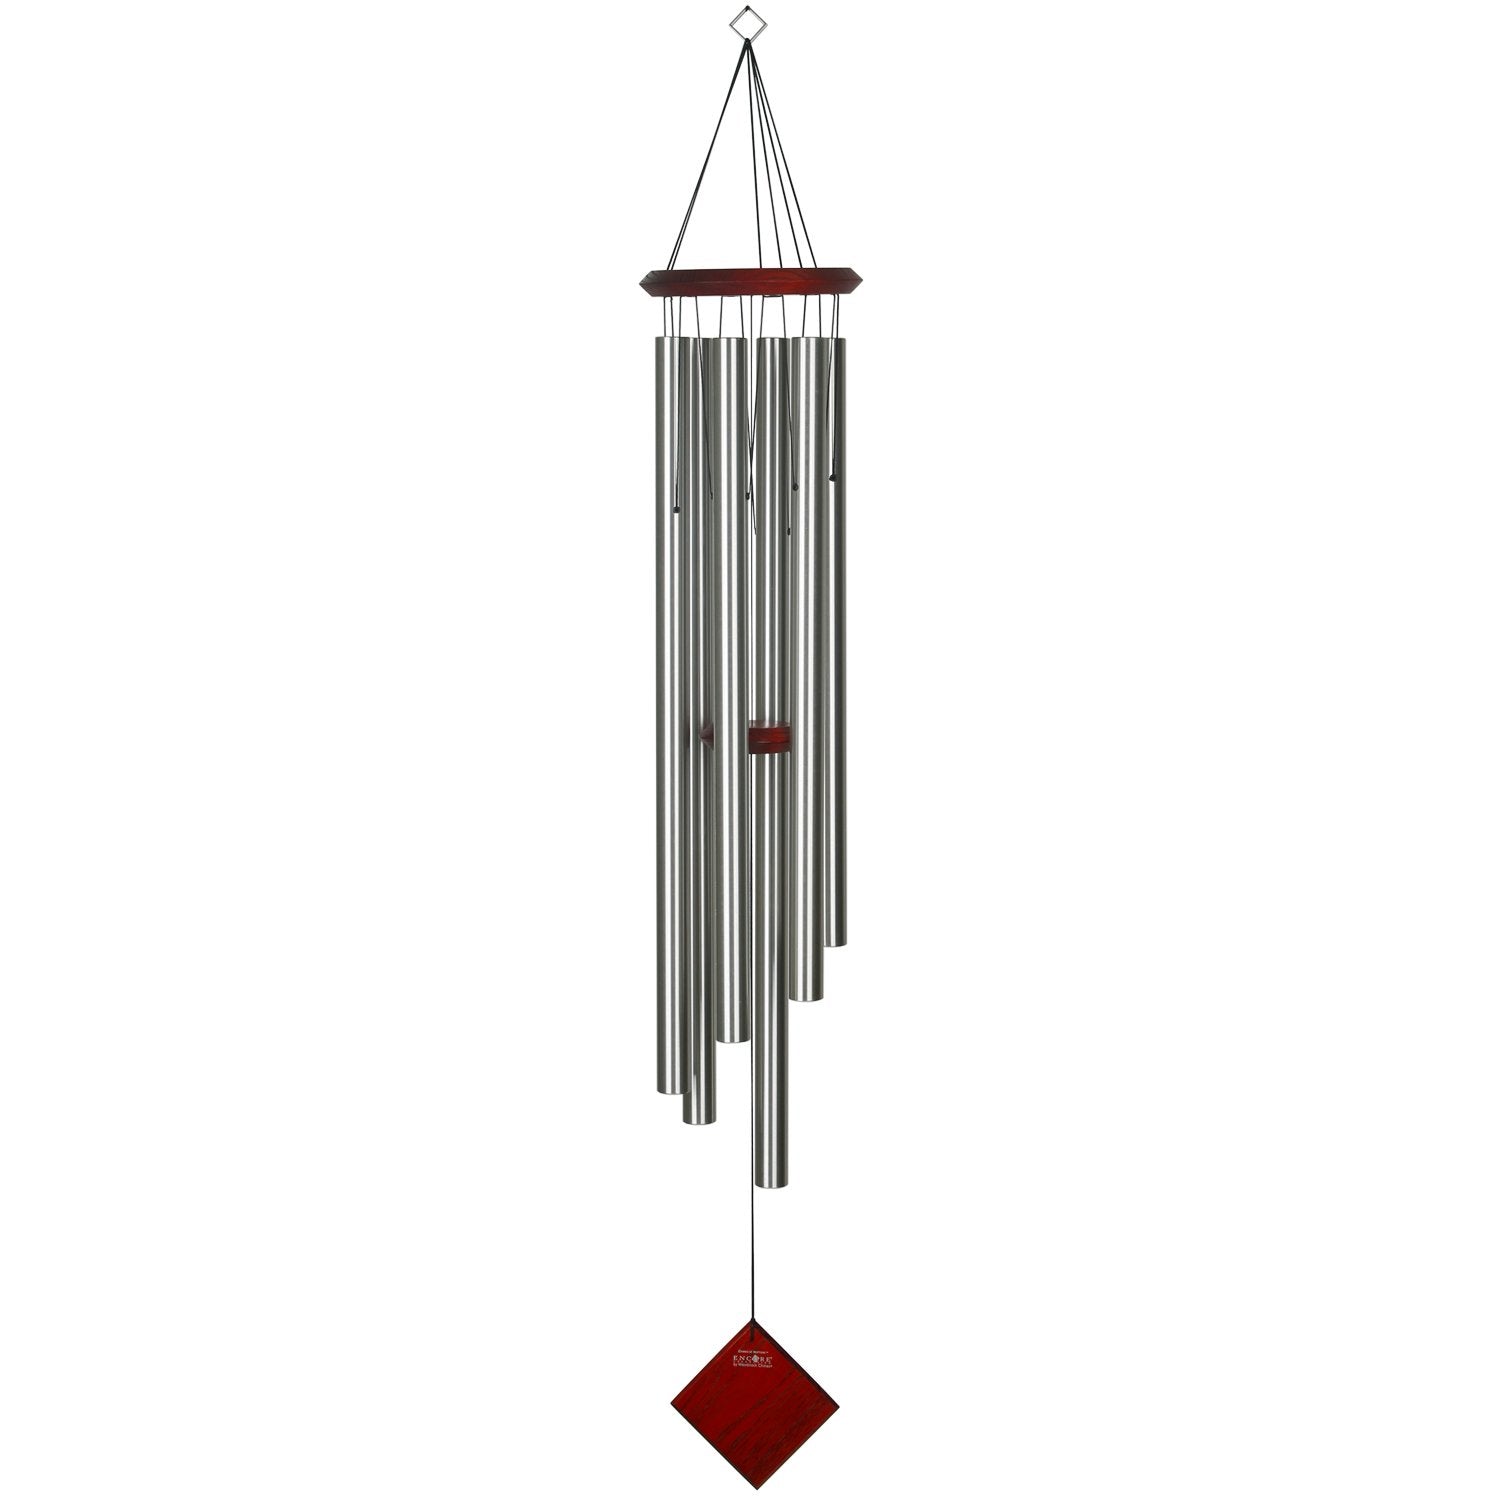 Encore Chimes of Neptune - Silver full product image